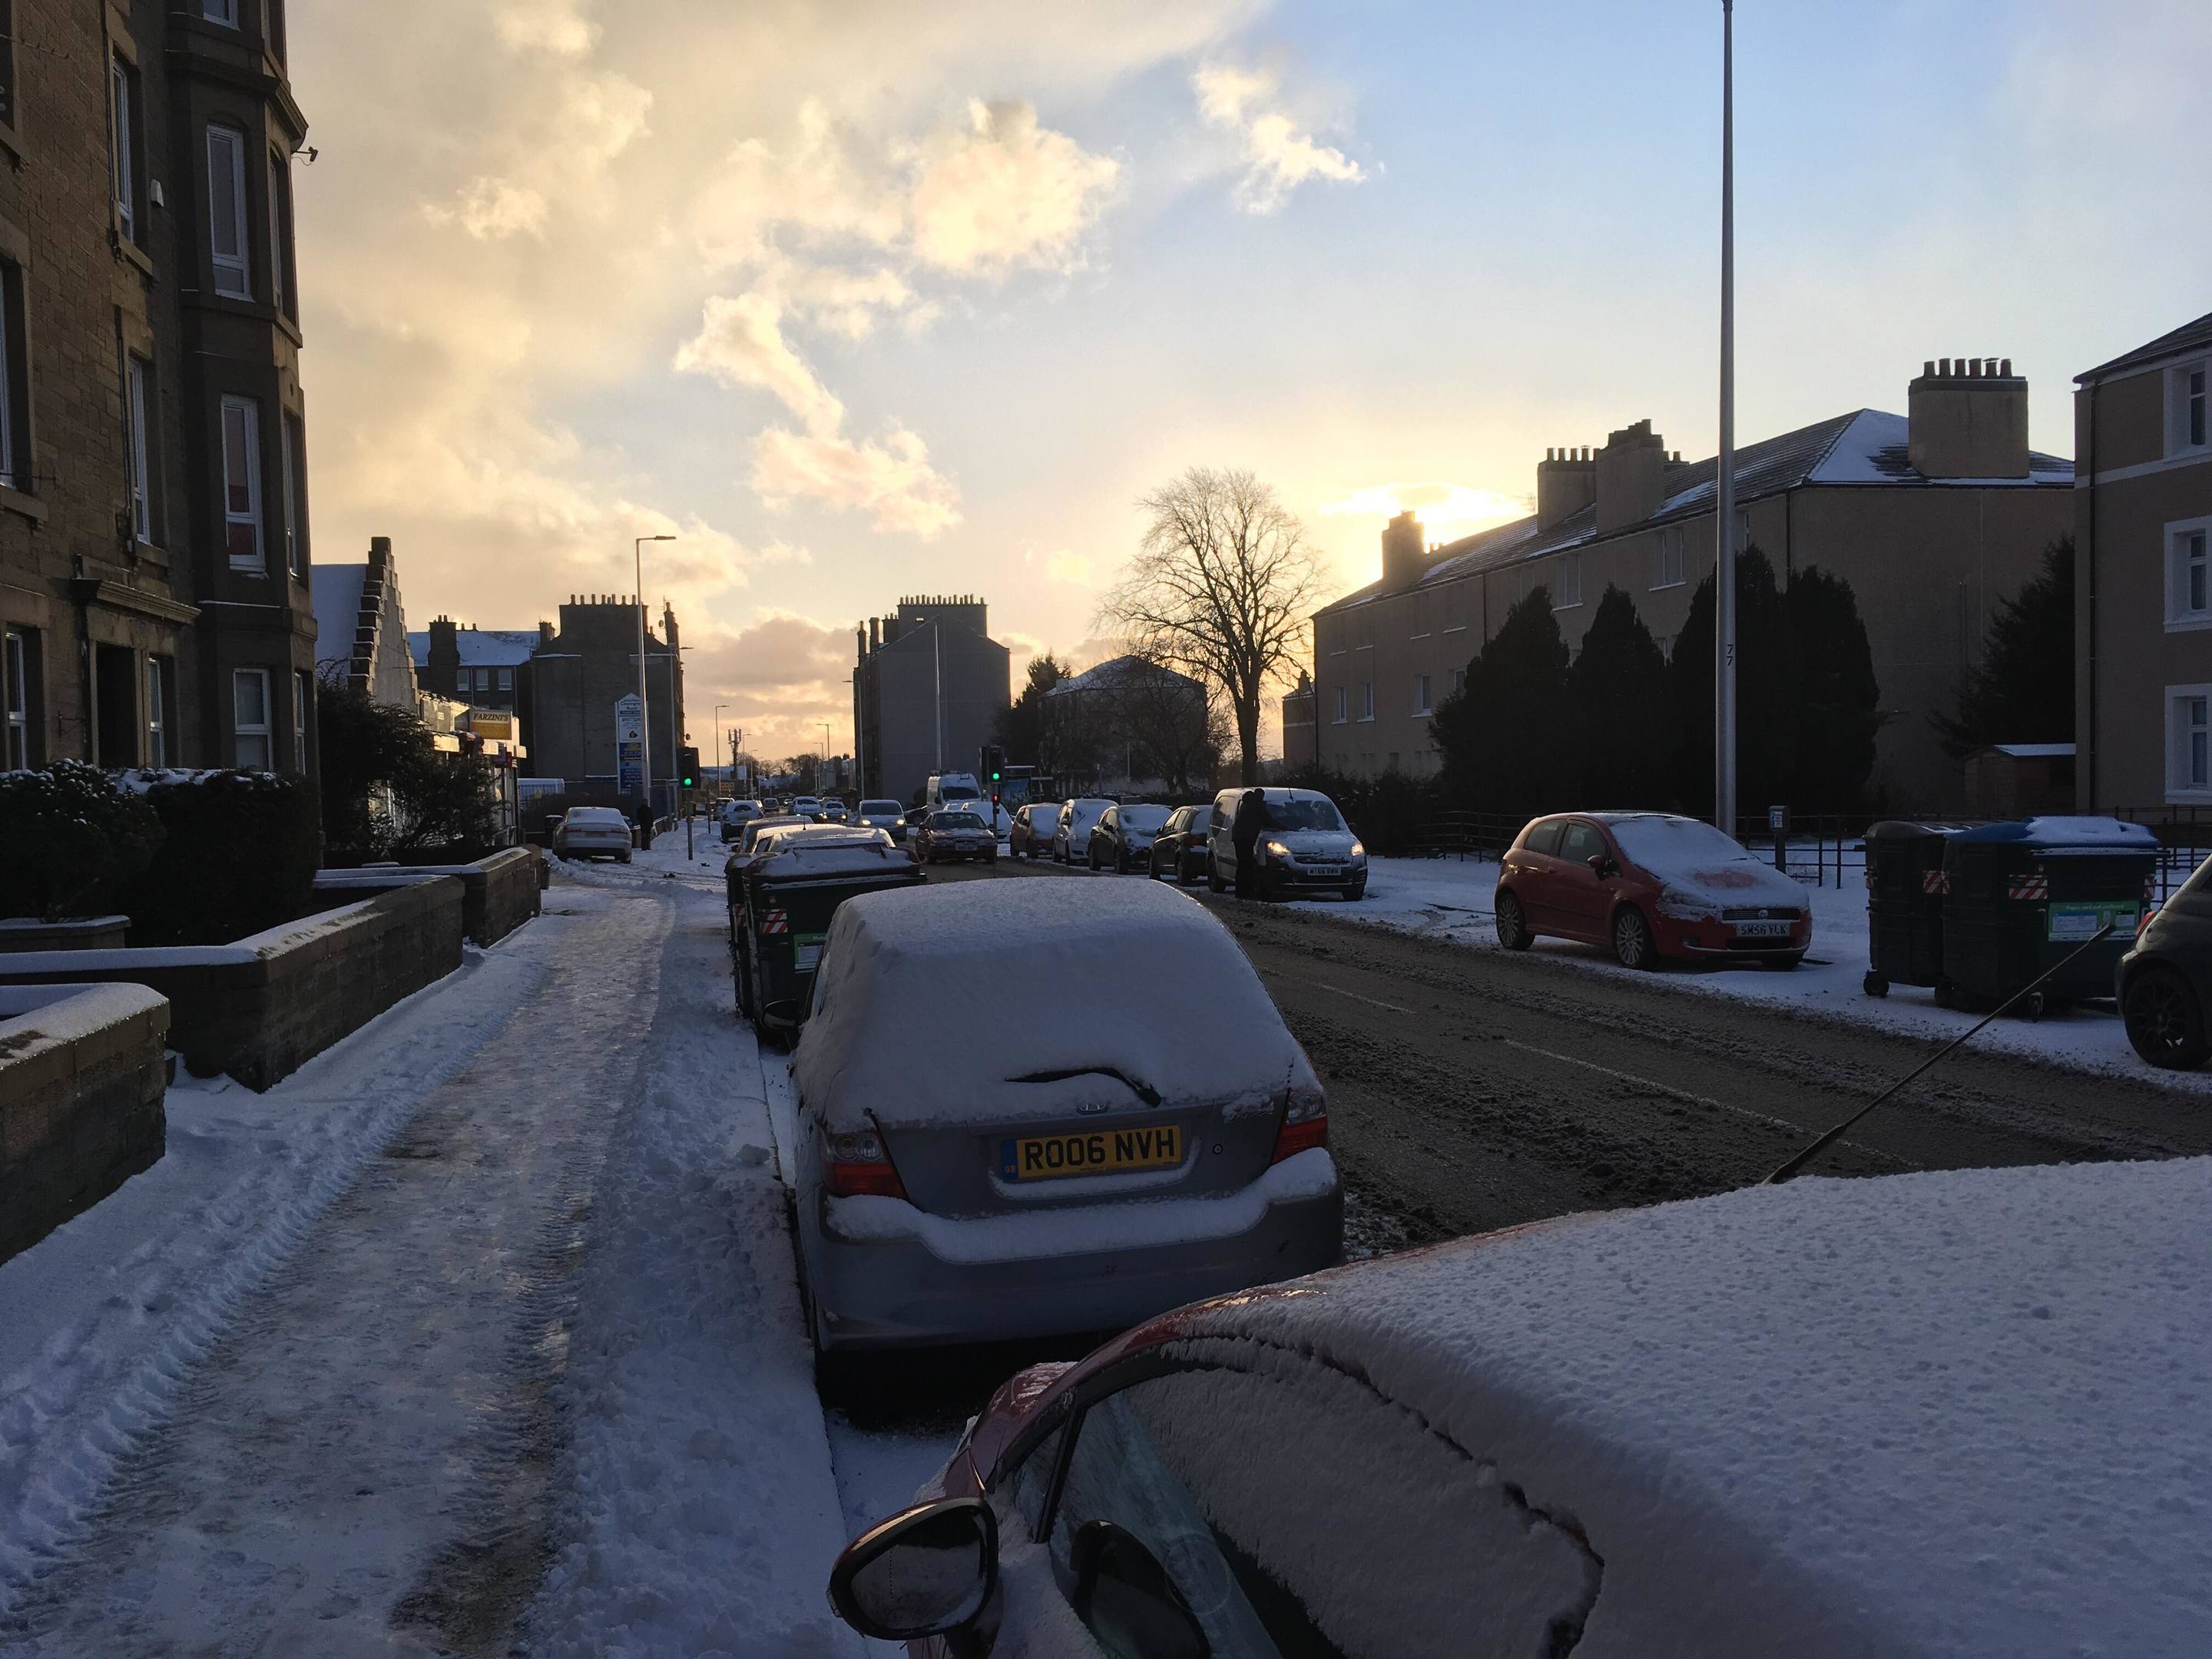 Snow on Clepington Road, Dundee on Wednesday morning.